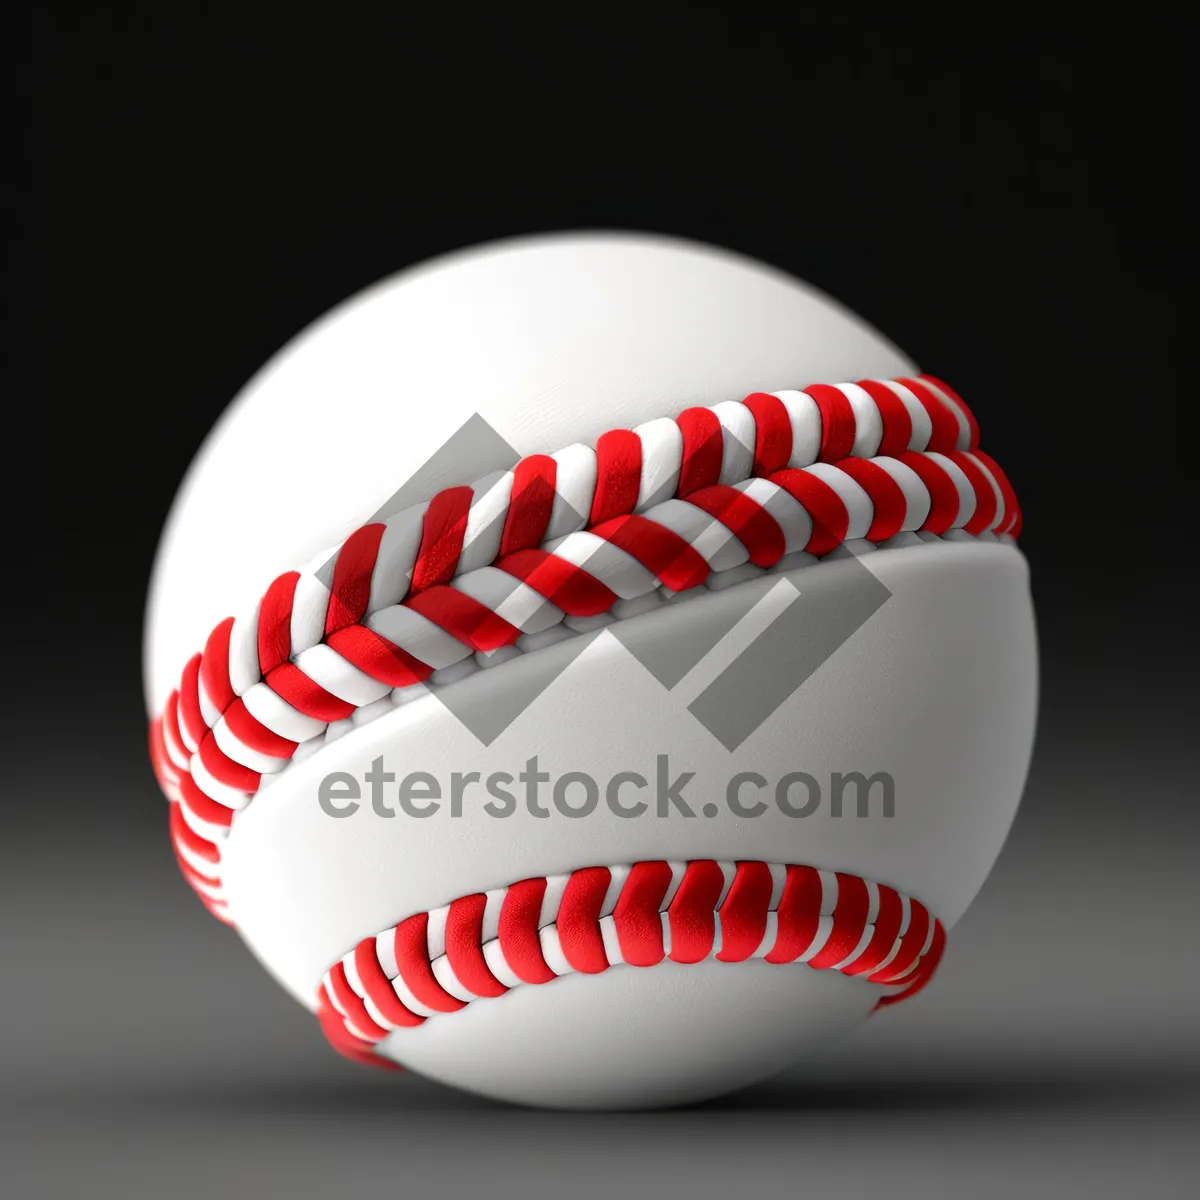 Picture of Baseball Equipment and Ball for Sports Game